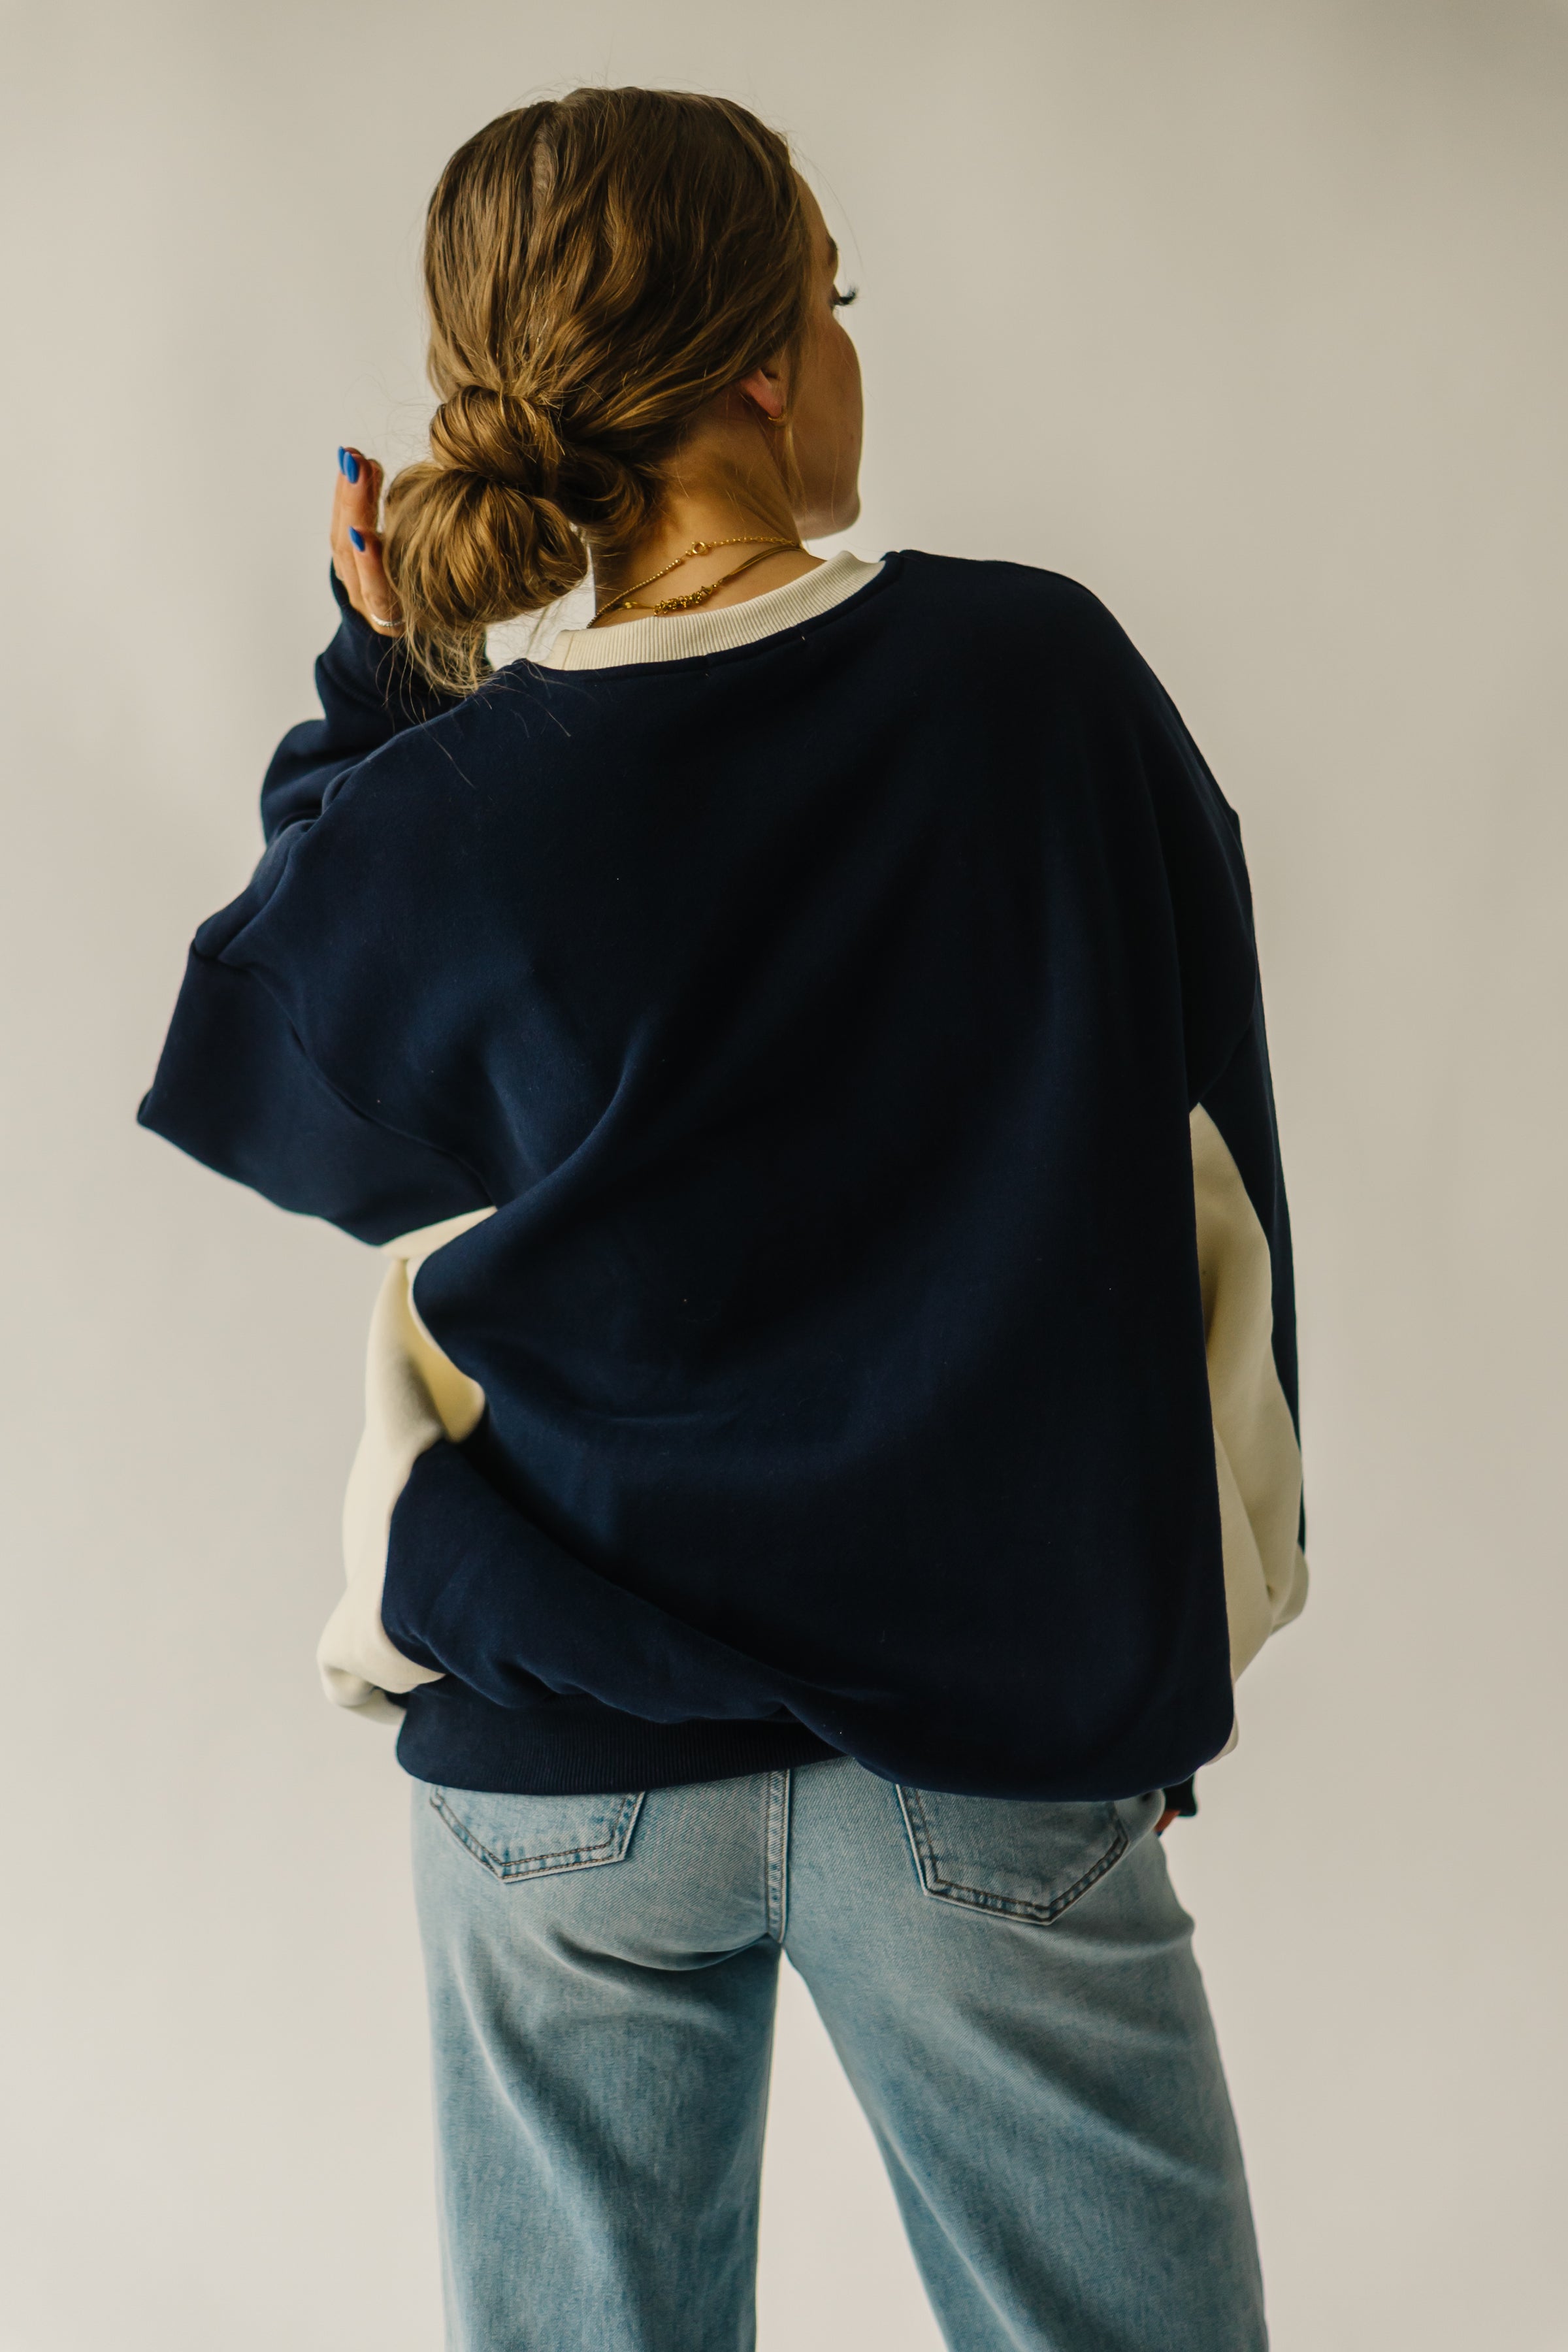 & – + Scoot Piper Graphic in Navy Sports Pullover The Club Cream